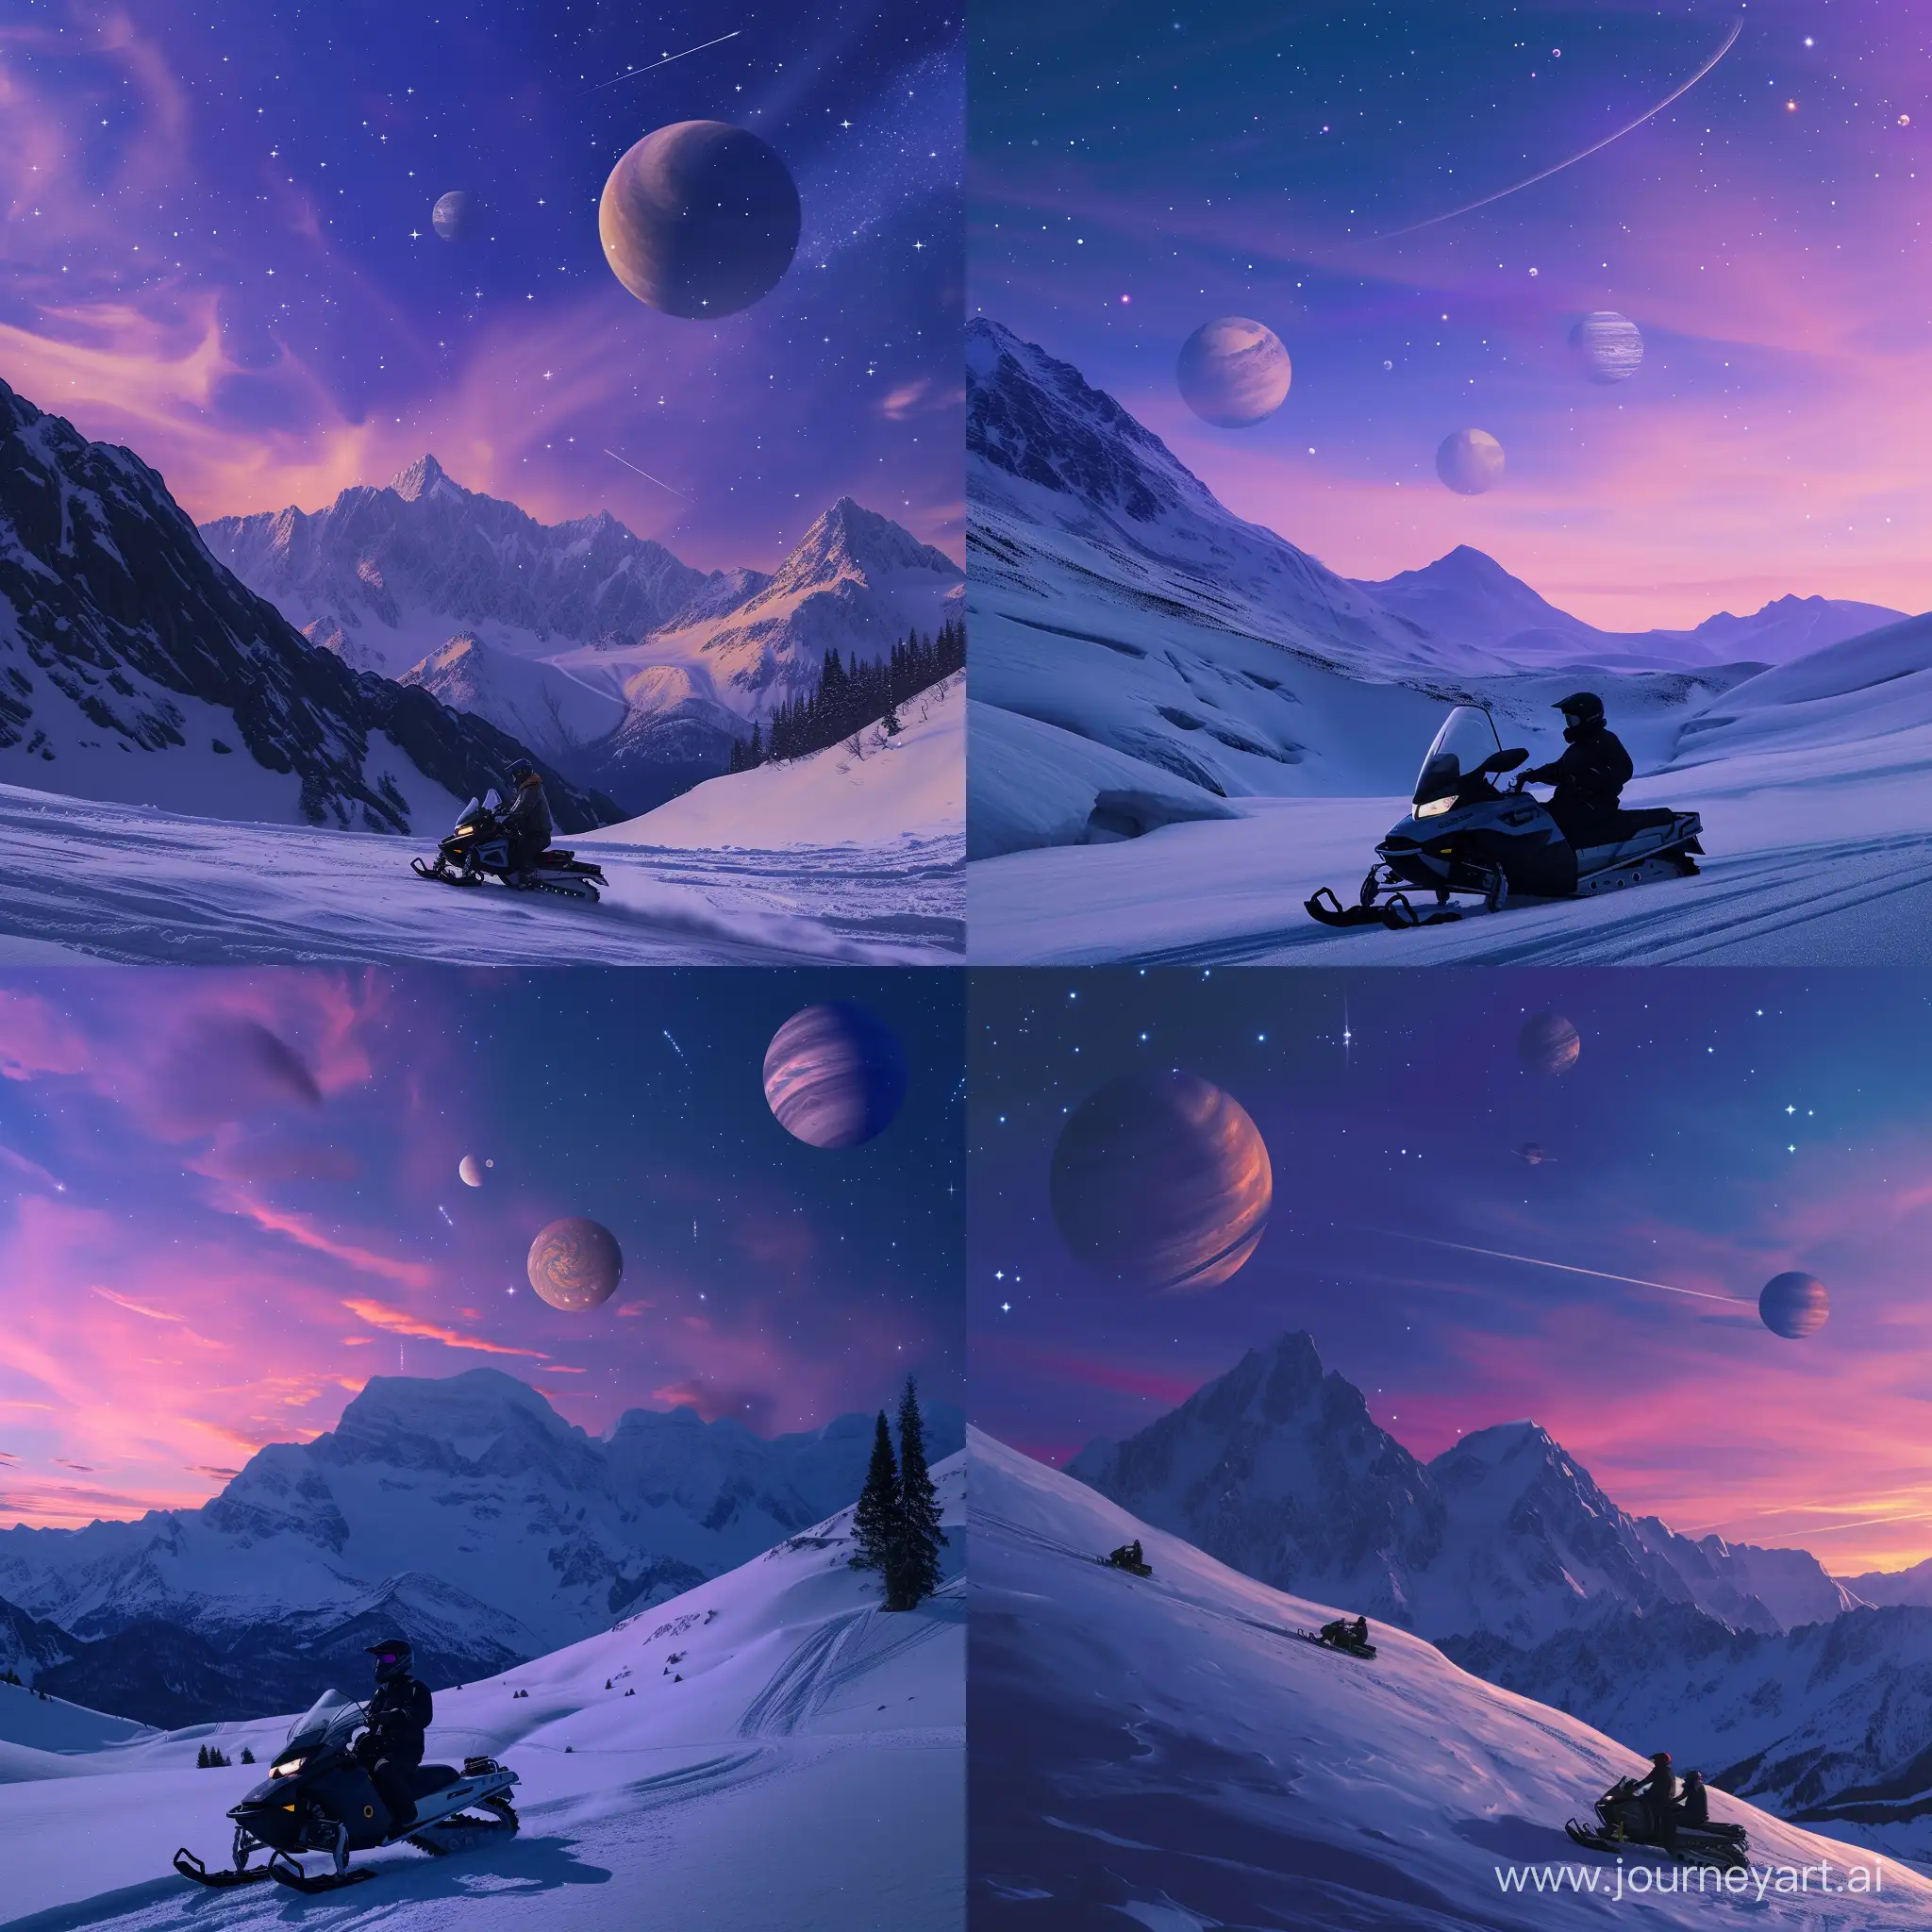 Snowmobile-Adventure-at-Dusk-Mountain-Ride-under-Cosmic-Sky